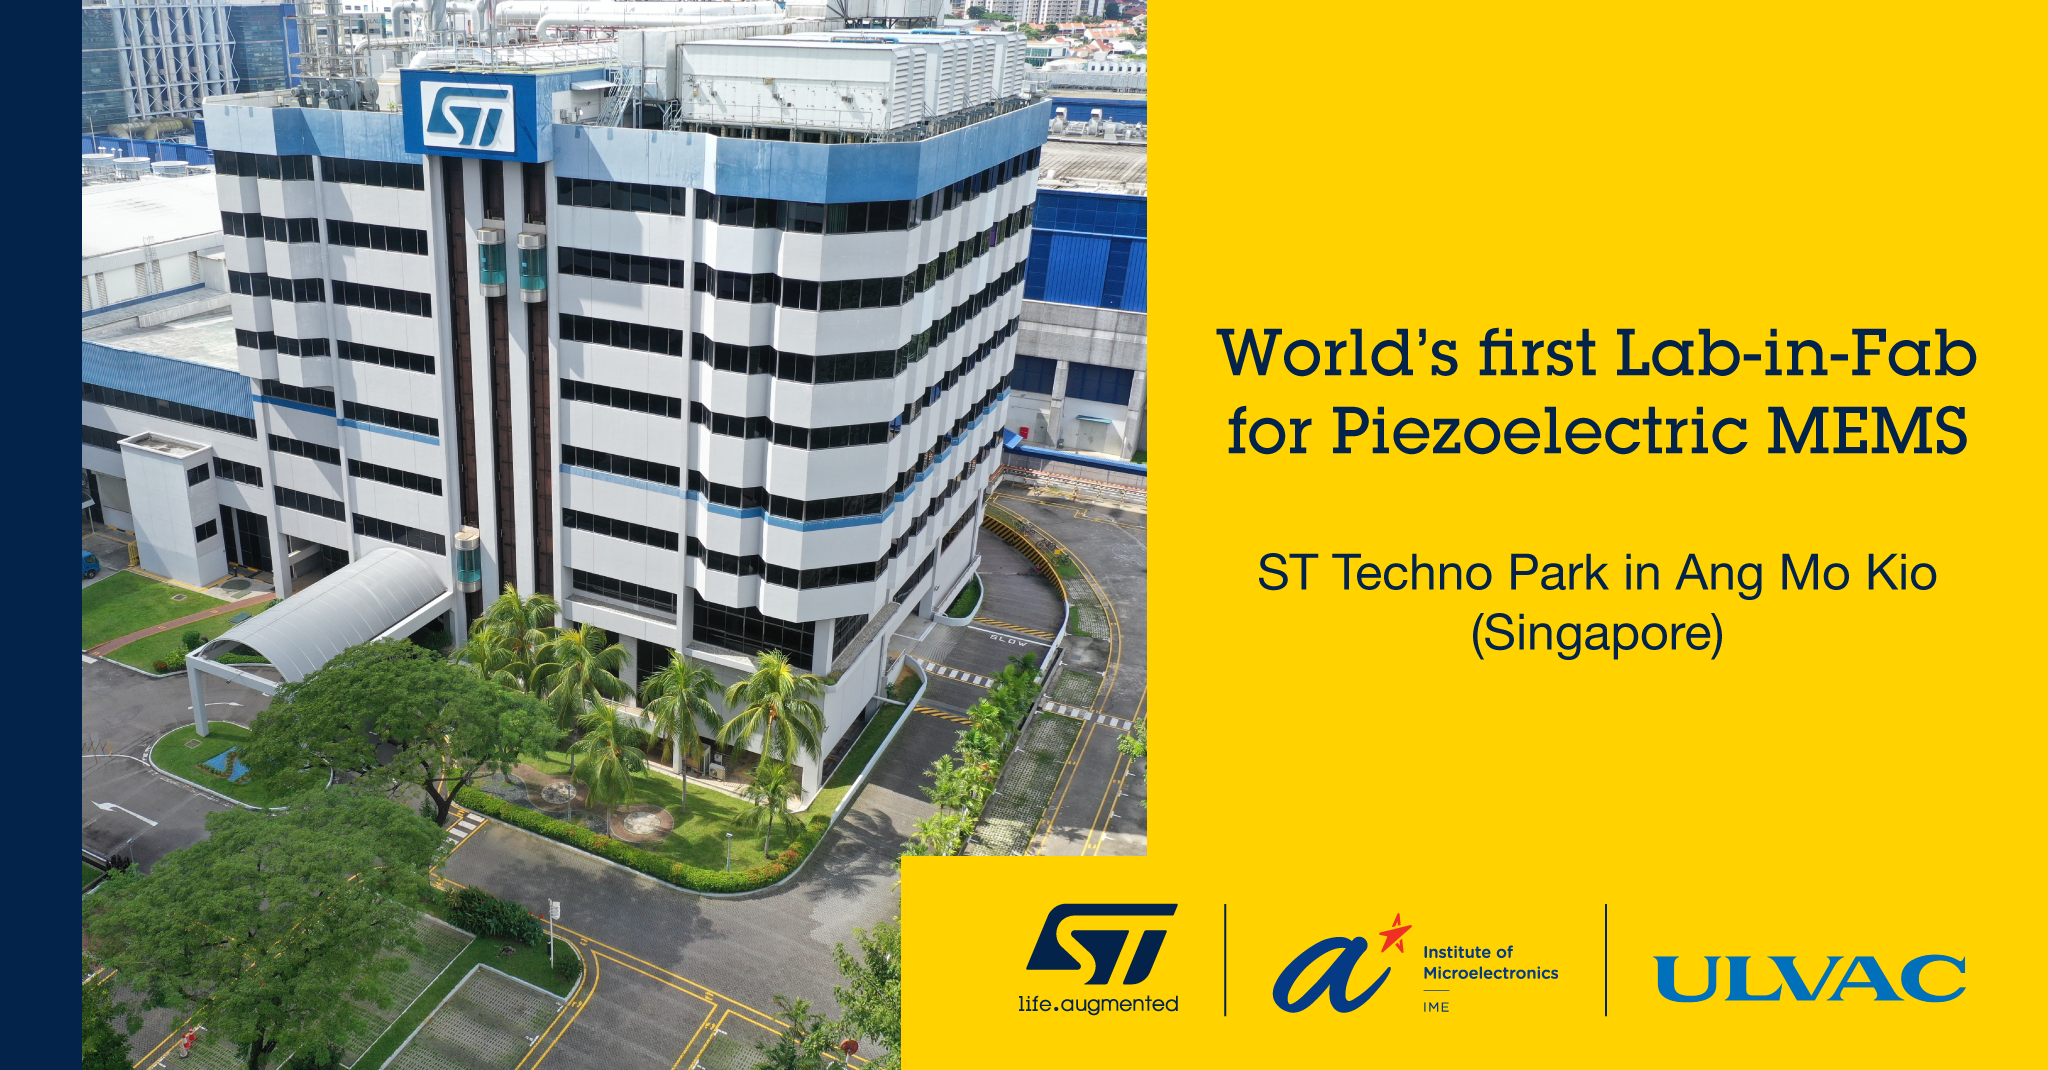 STMicroelectronics Establishes World’s First “Lab-in-Fab” to Advance Adoption of Piezoelectric MEMS in Singapore in Partnership with A*STAR and ULVAC